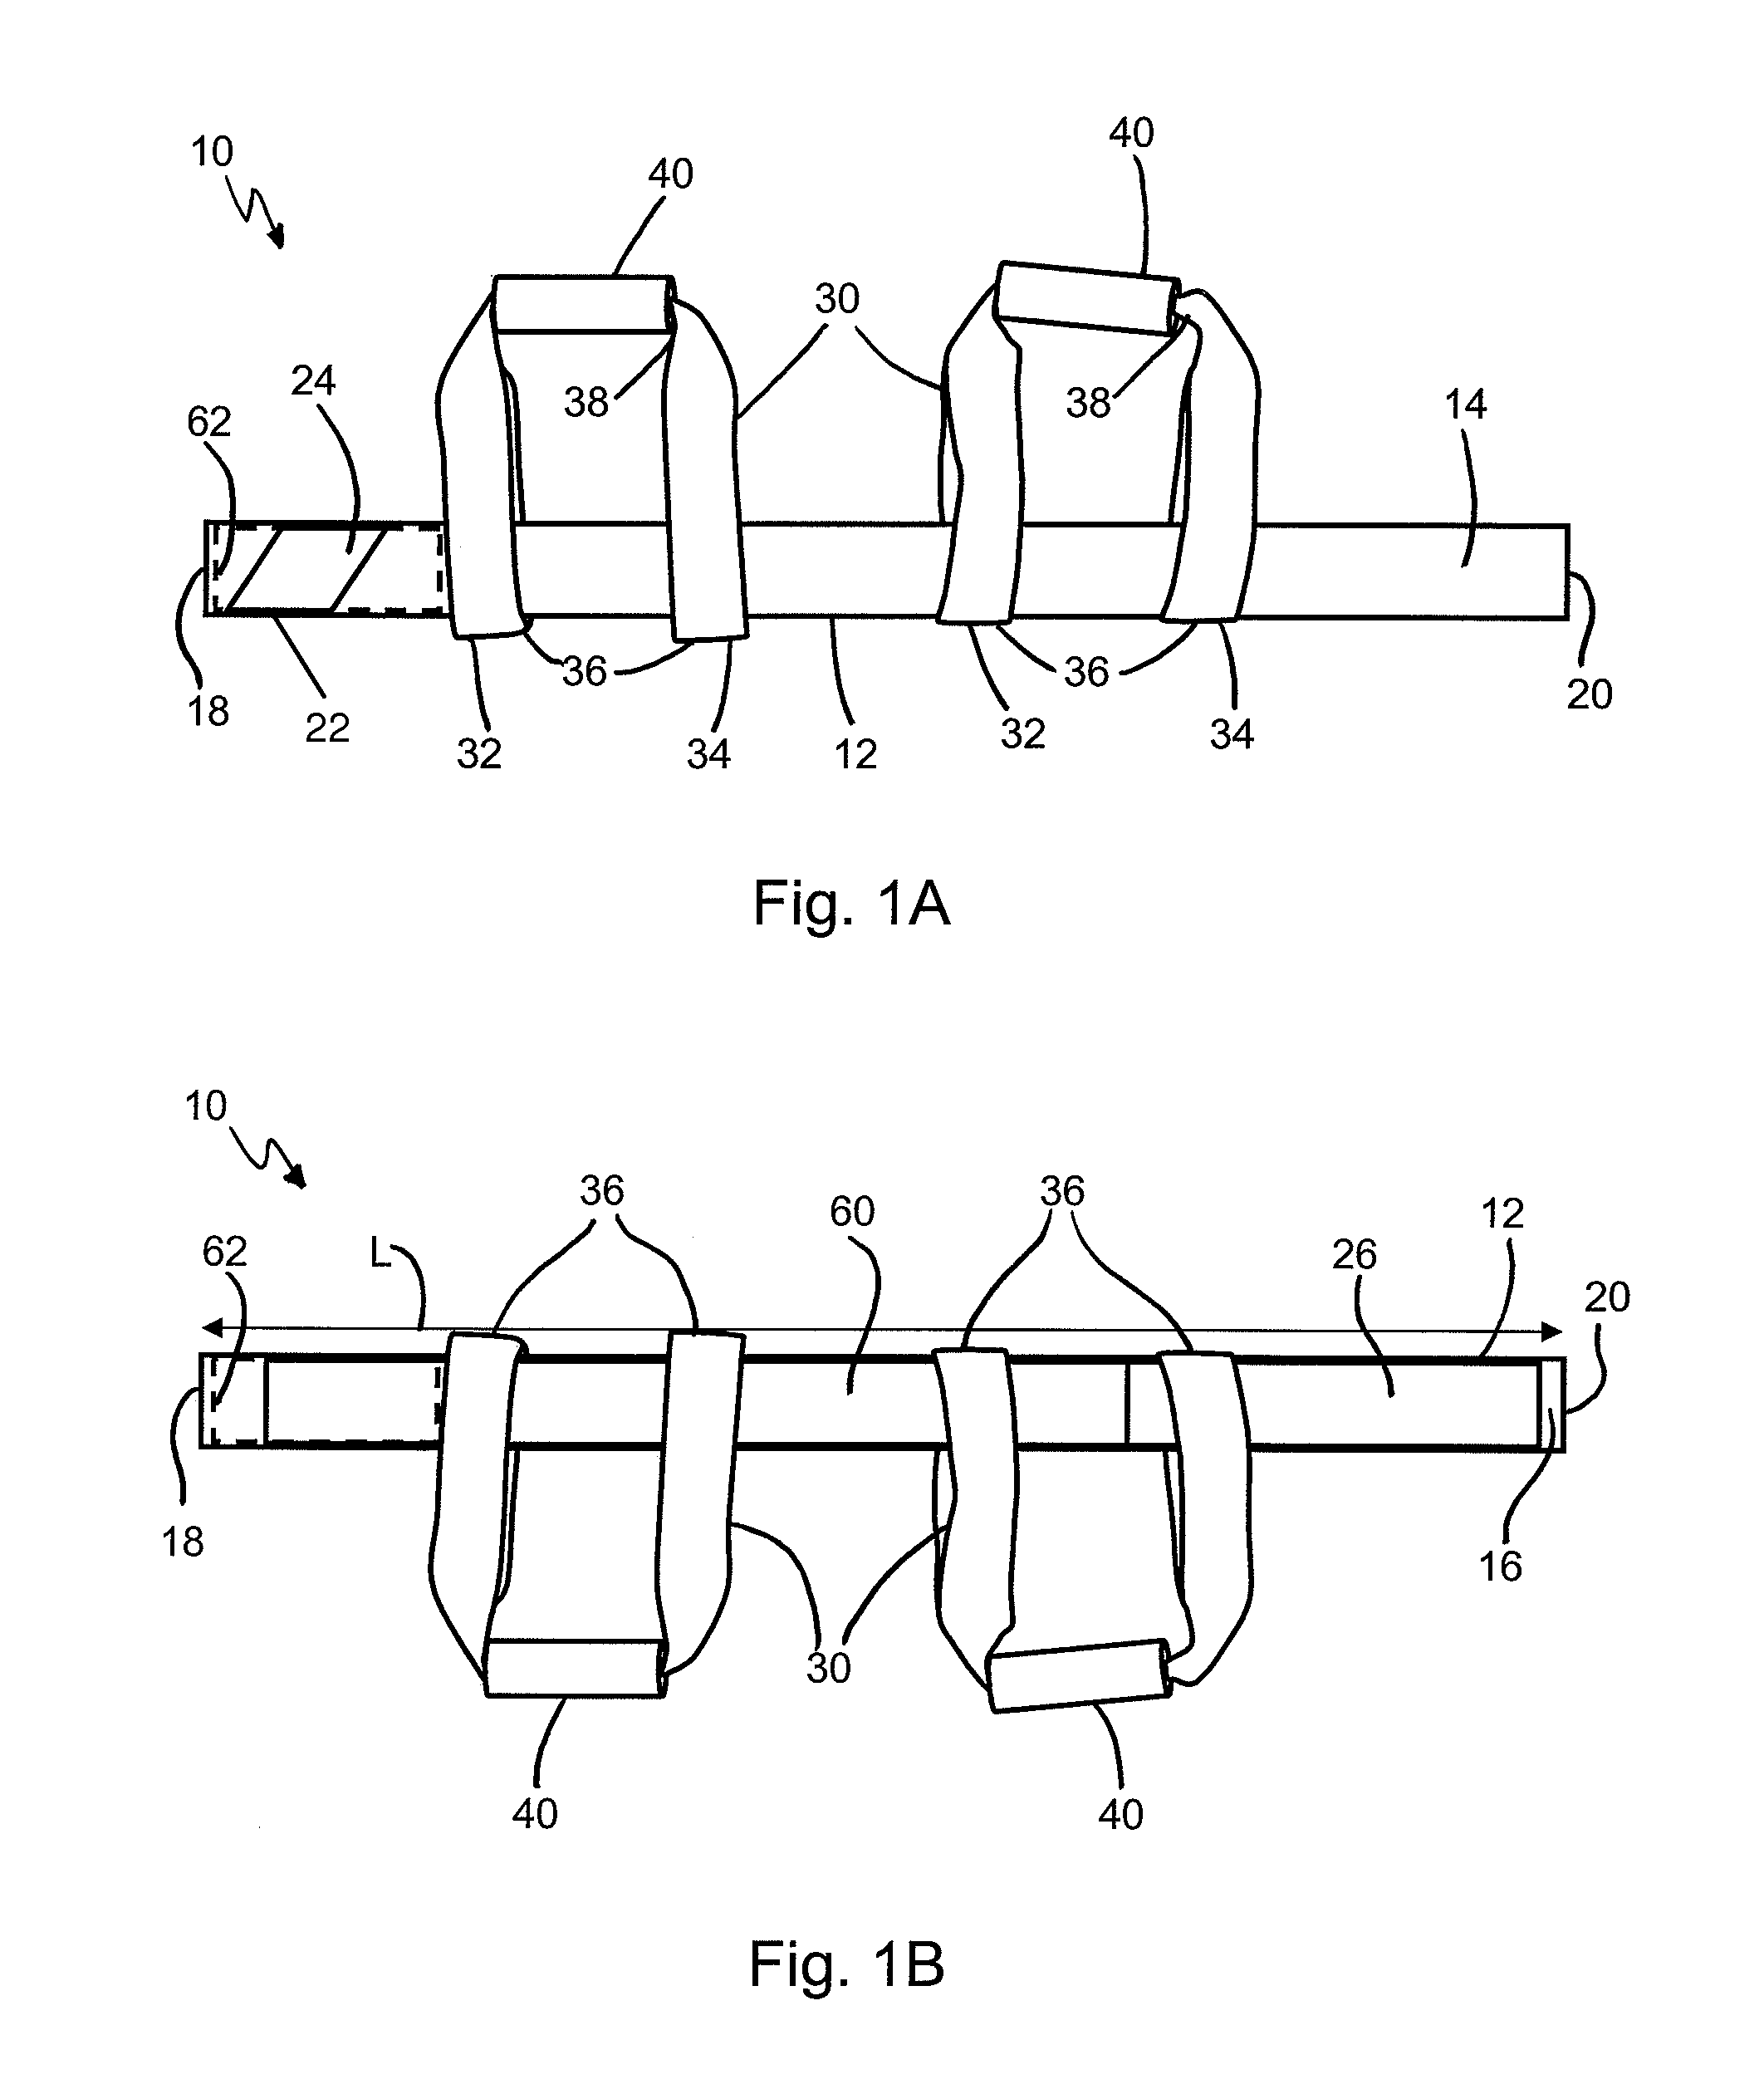 Manual Spinal Traction Device